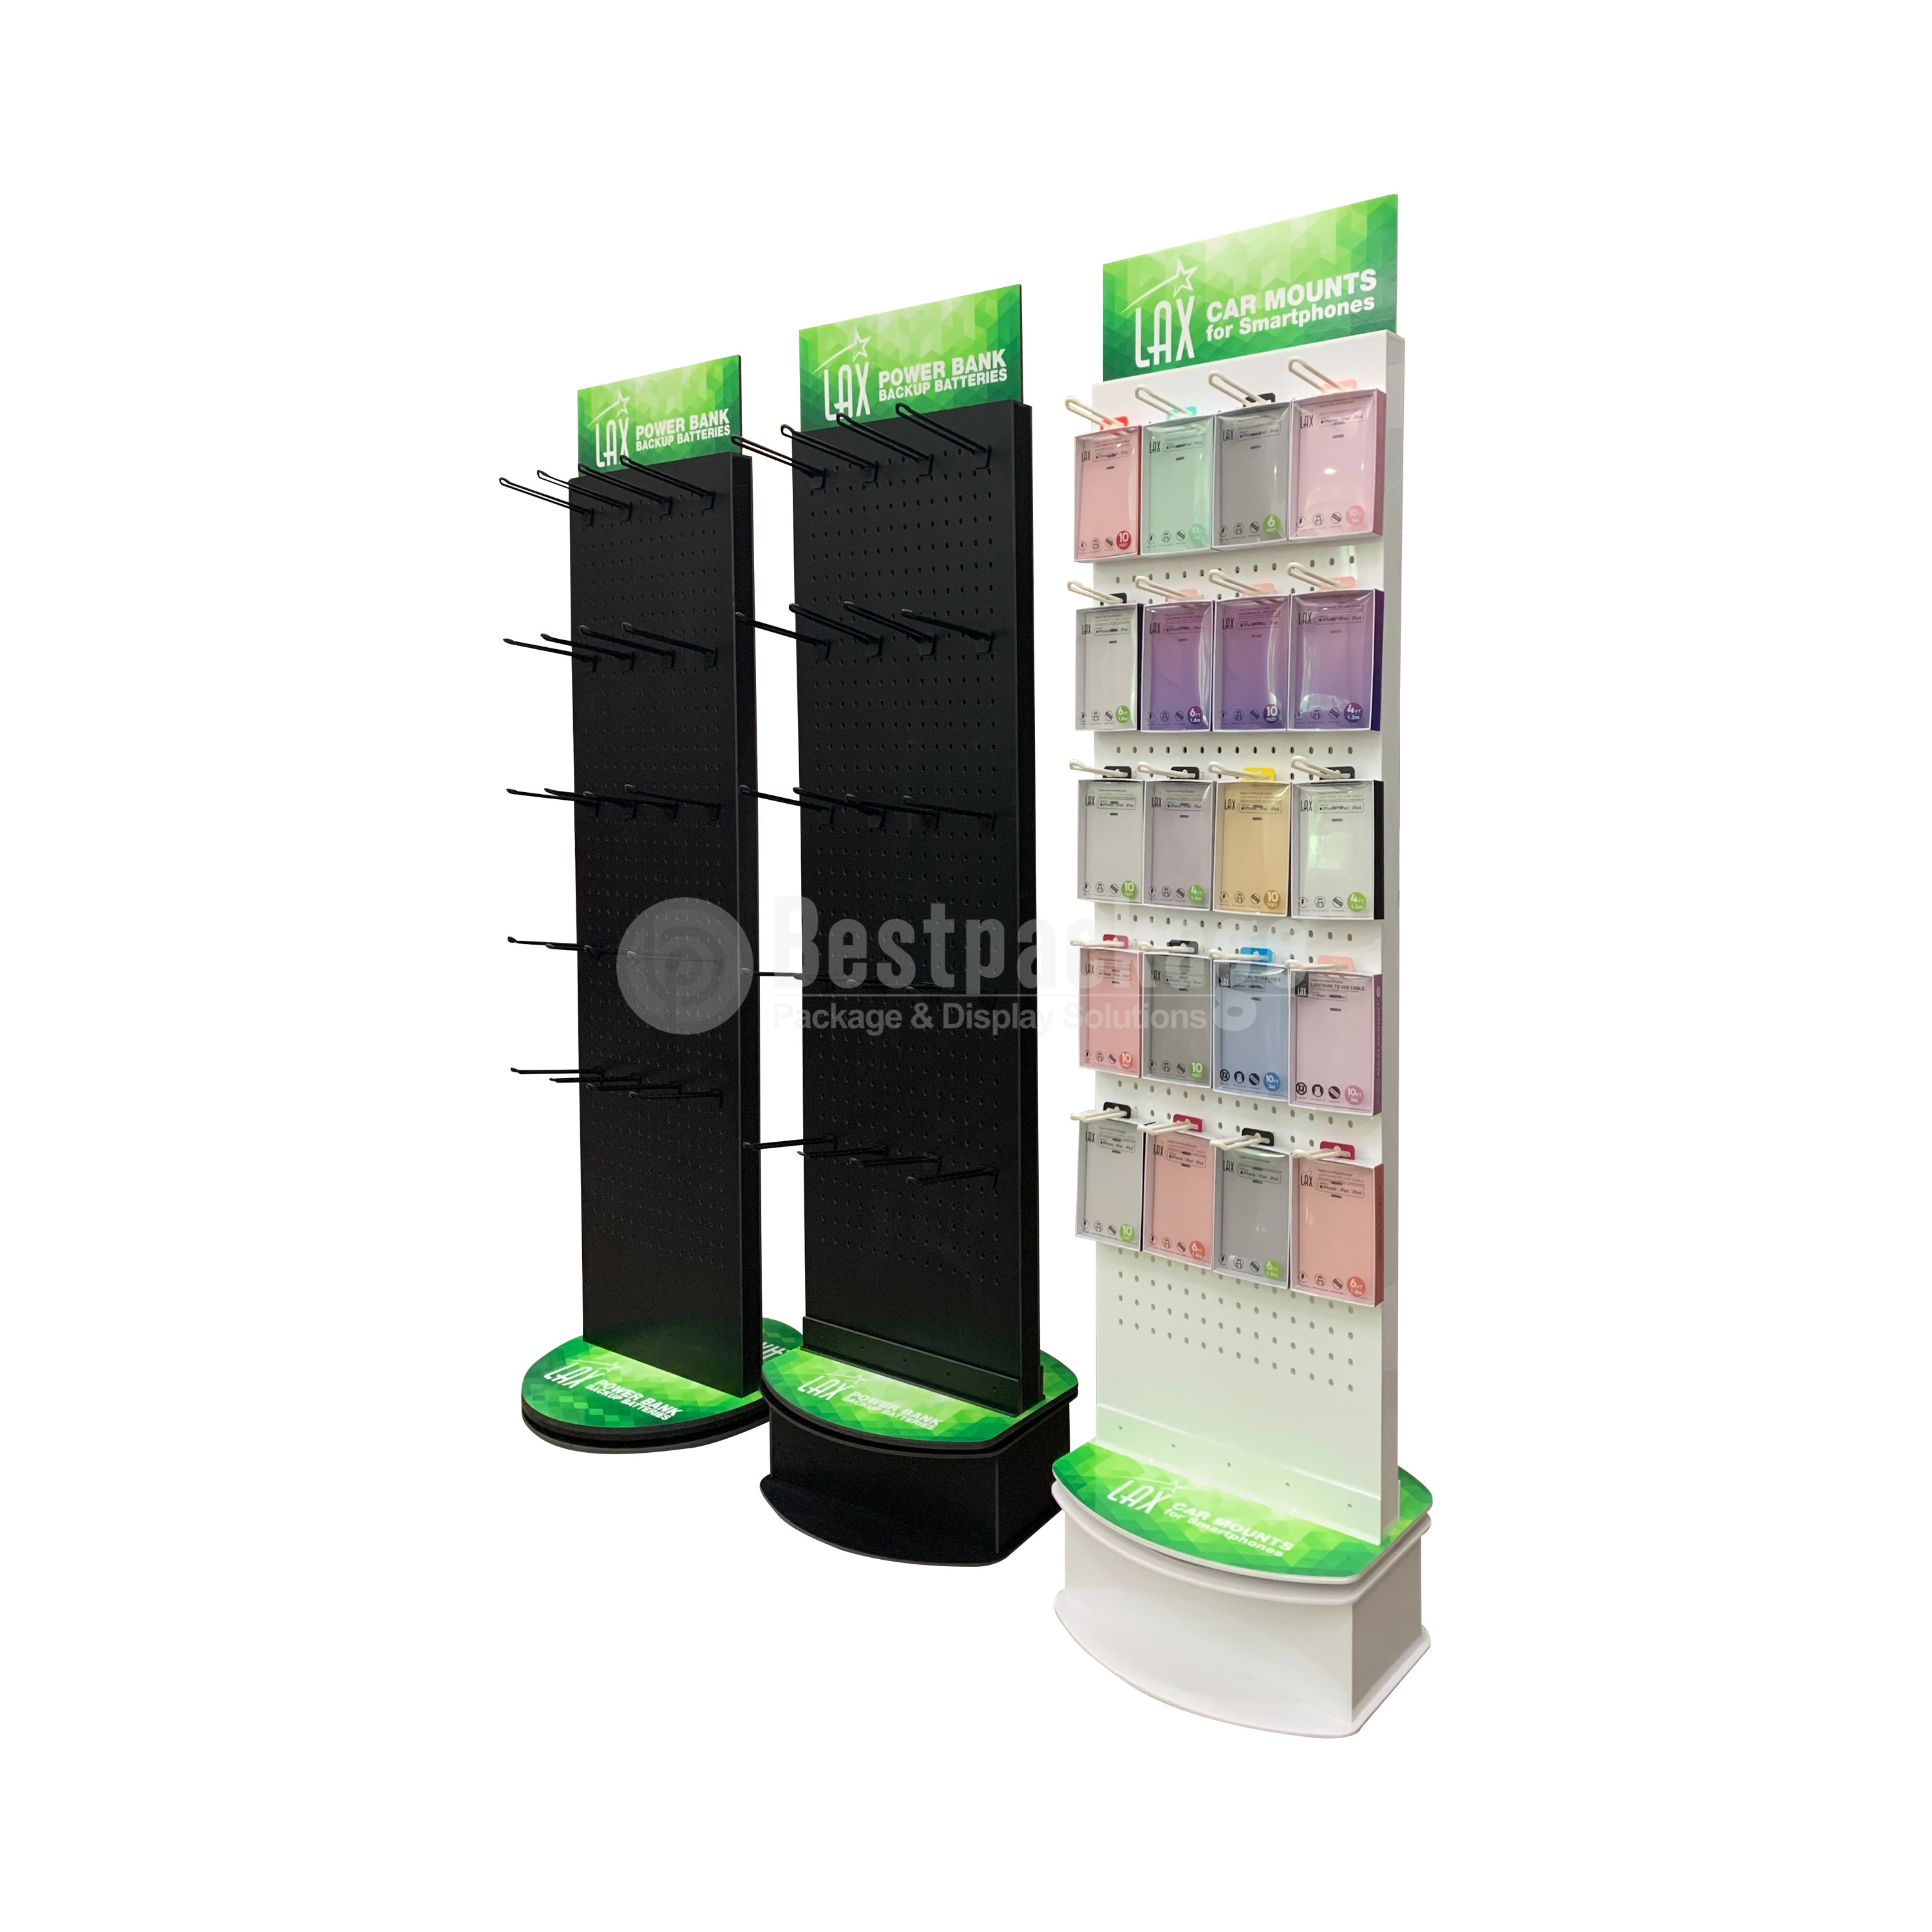 DPF01004 Plastic Pegboard Display, Small Electronic Display, Accessory Display, Spinning Floor Display